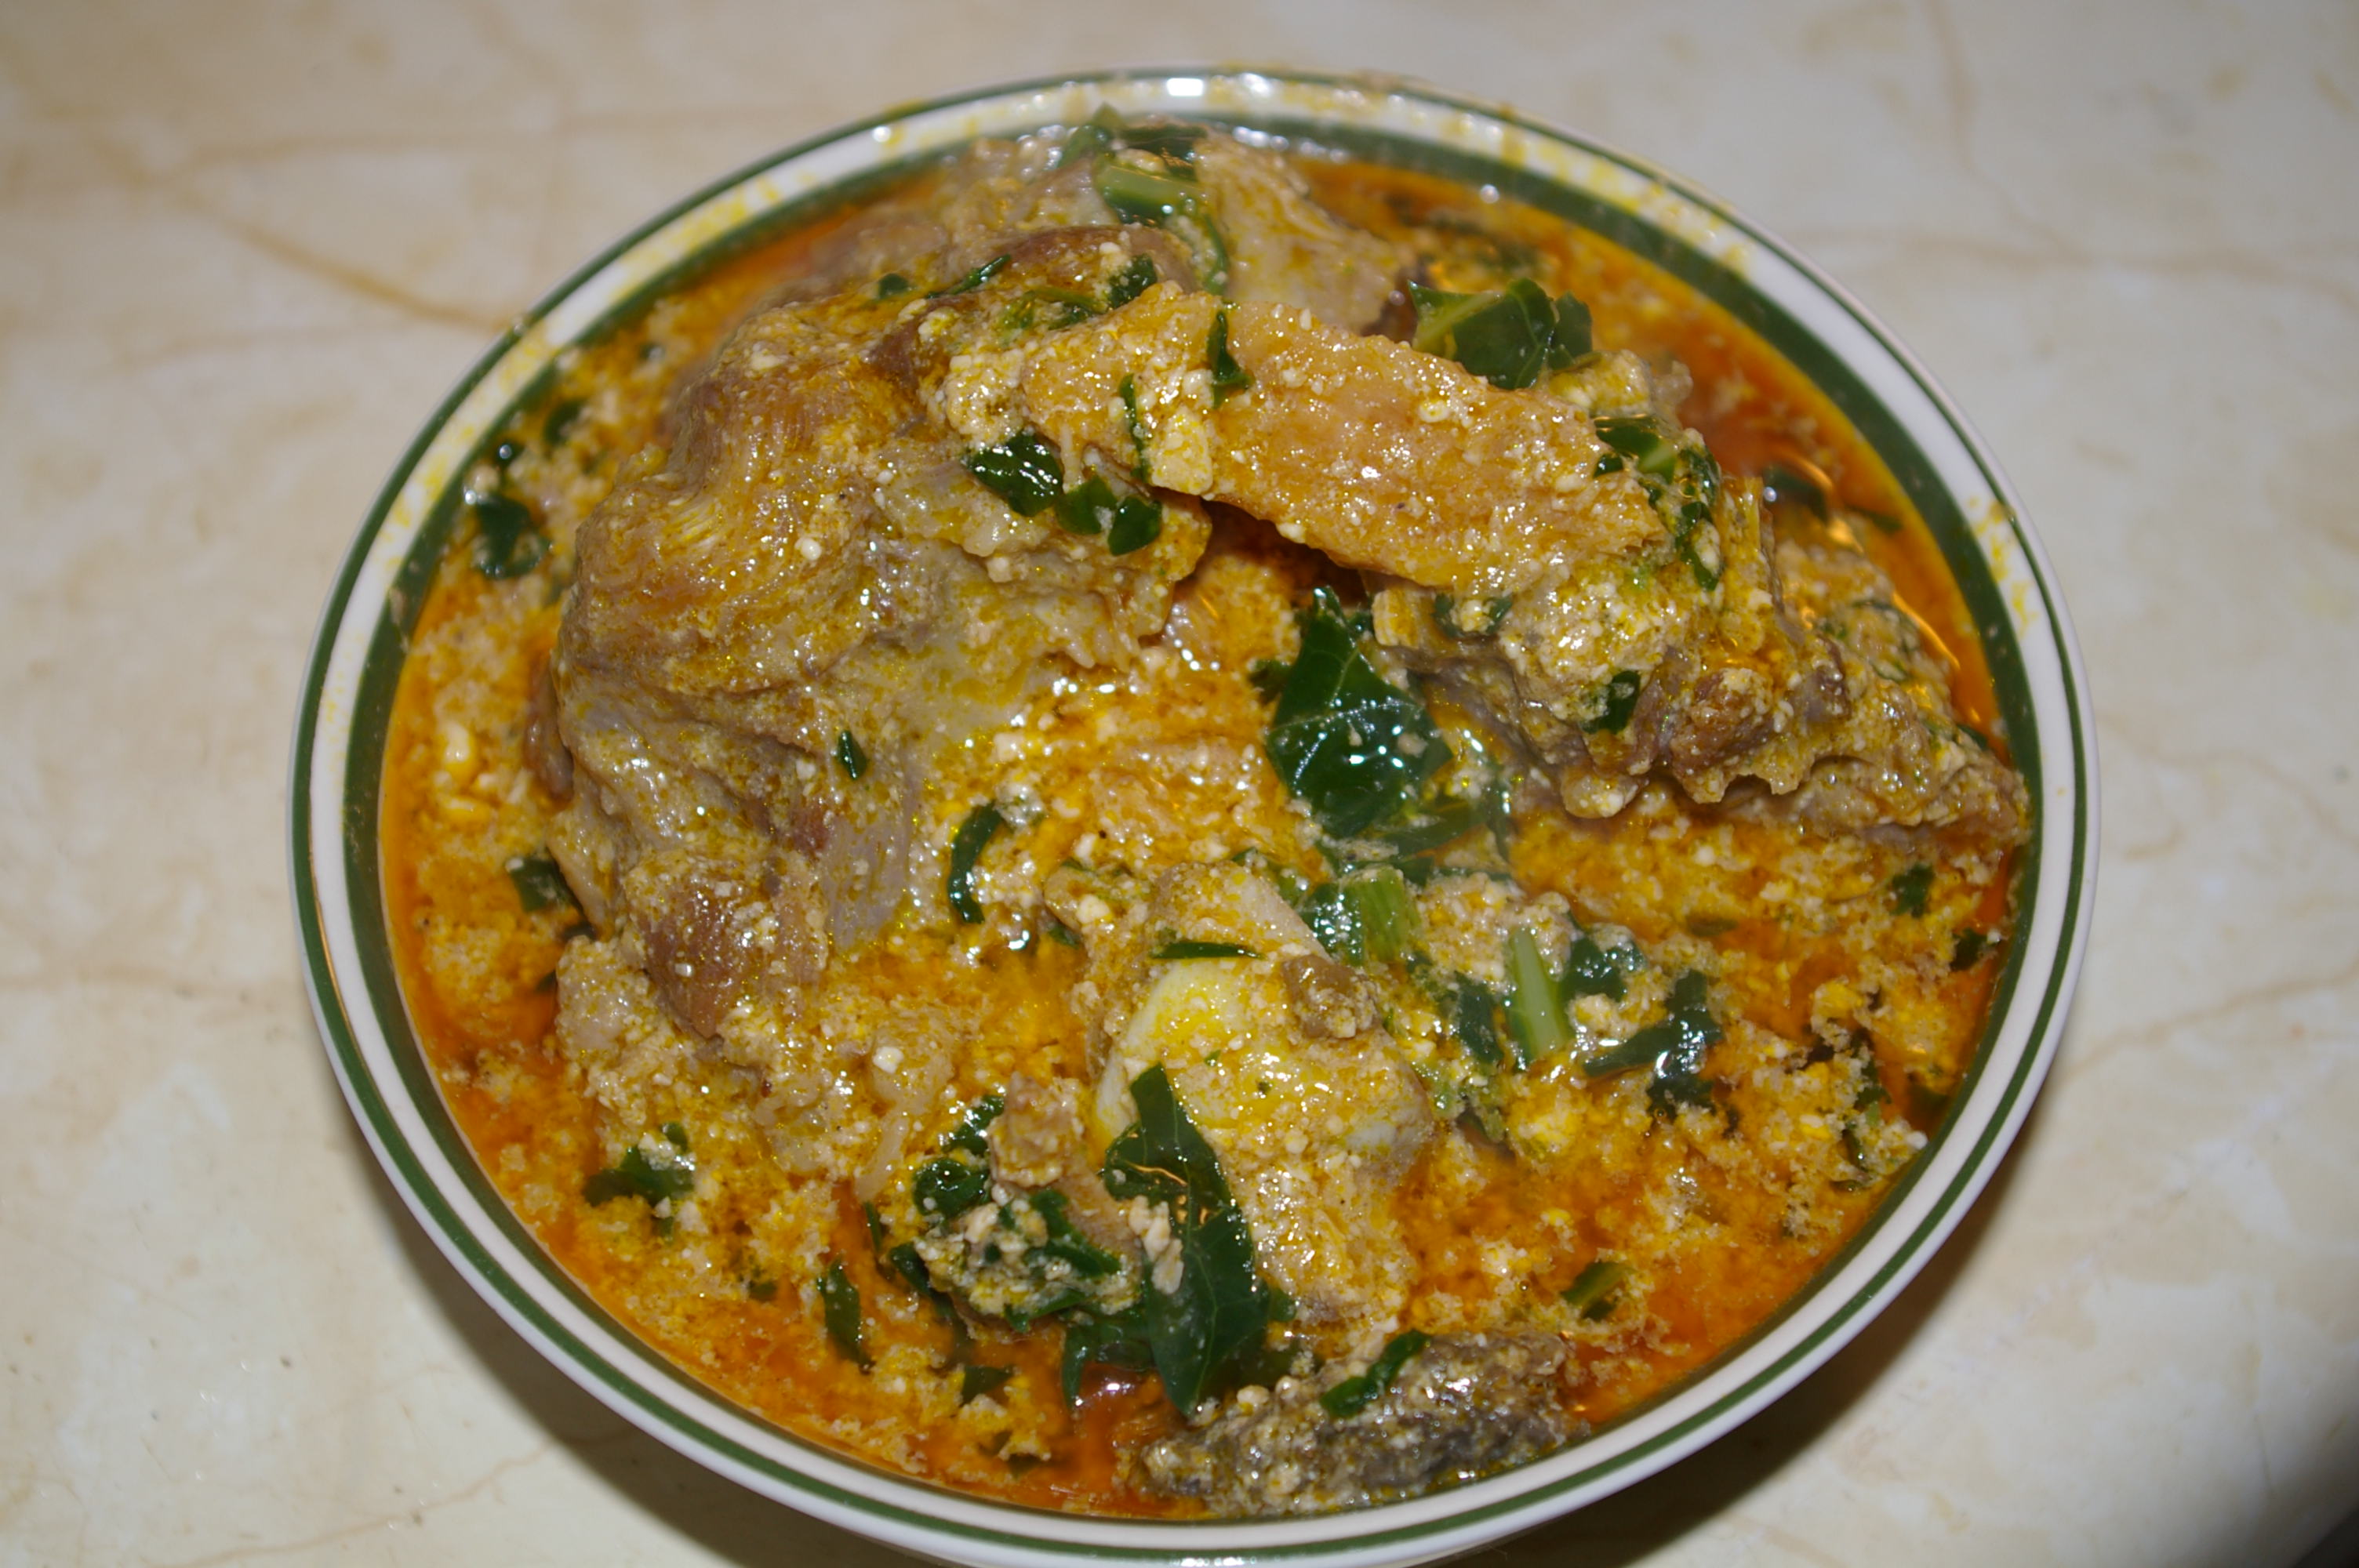 Recipe With Fufu And Egusi Soup / Fufu Recipe: 10 Delicious Ways to Eat ...